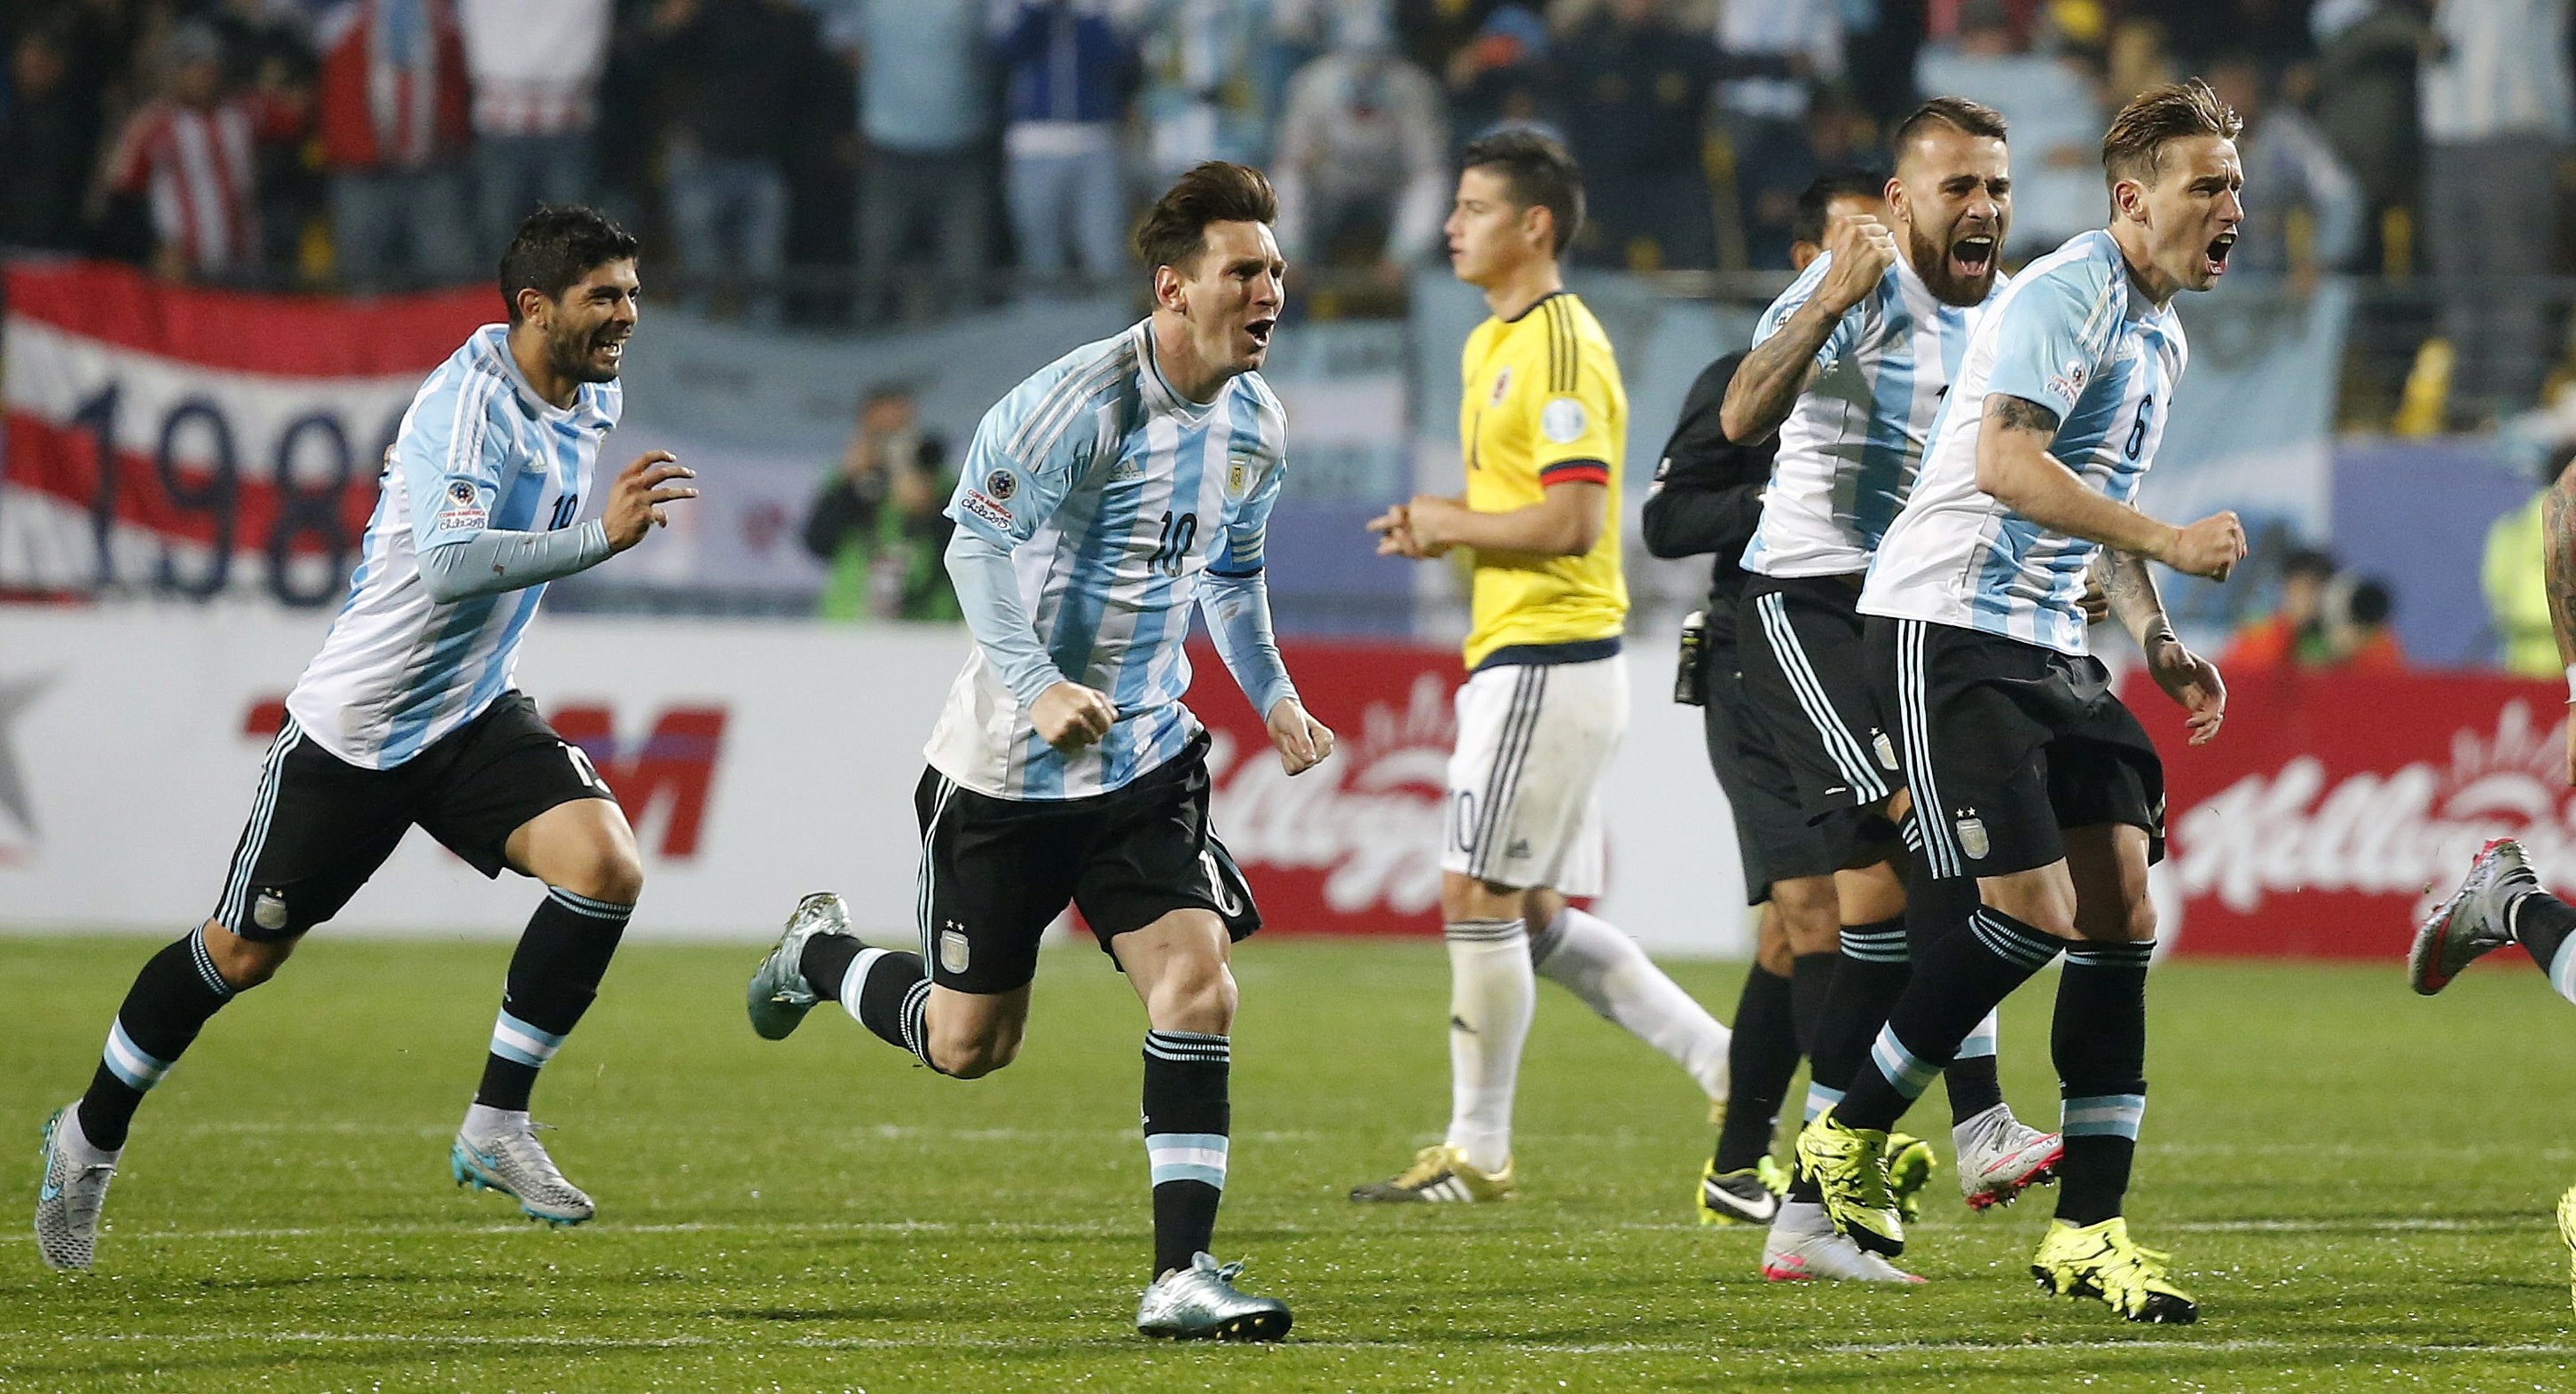 epa04820904 Argentinian players celebrate teammate Carlos Tevez's goal in the penalty shootout during the Copa America 2015 quarter-final soccer match between Argentina and Colombia, at Estadio Sausalito in Vina del Mar, Chile, 26 June 2015.  EPA/JUAN CARLOS CARDENAS